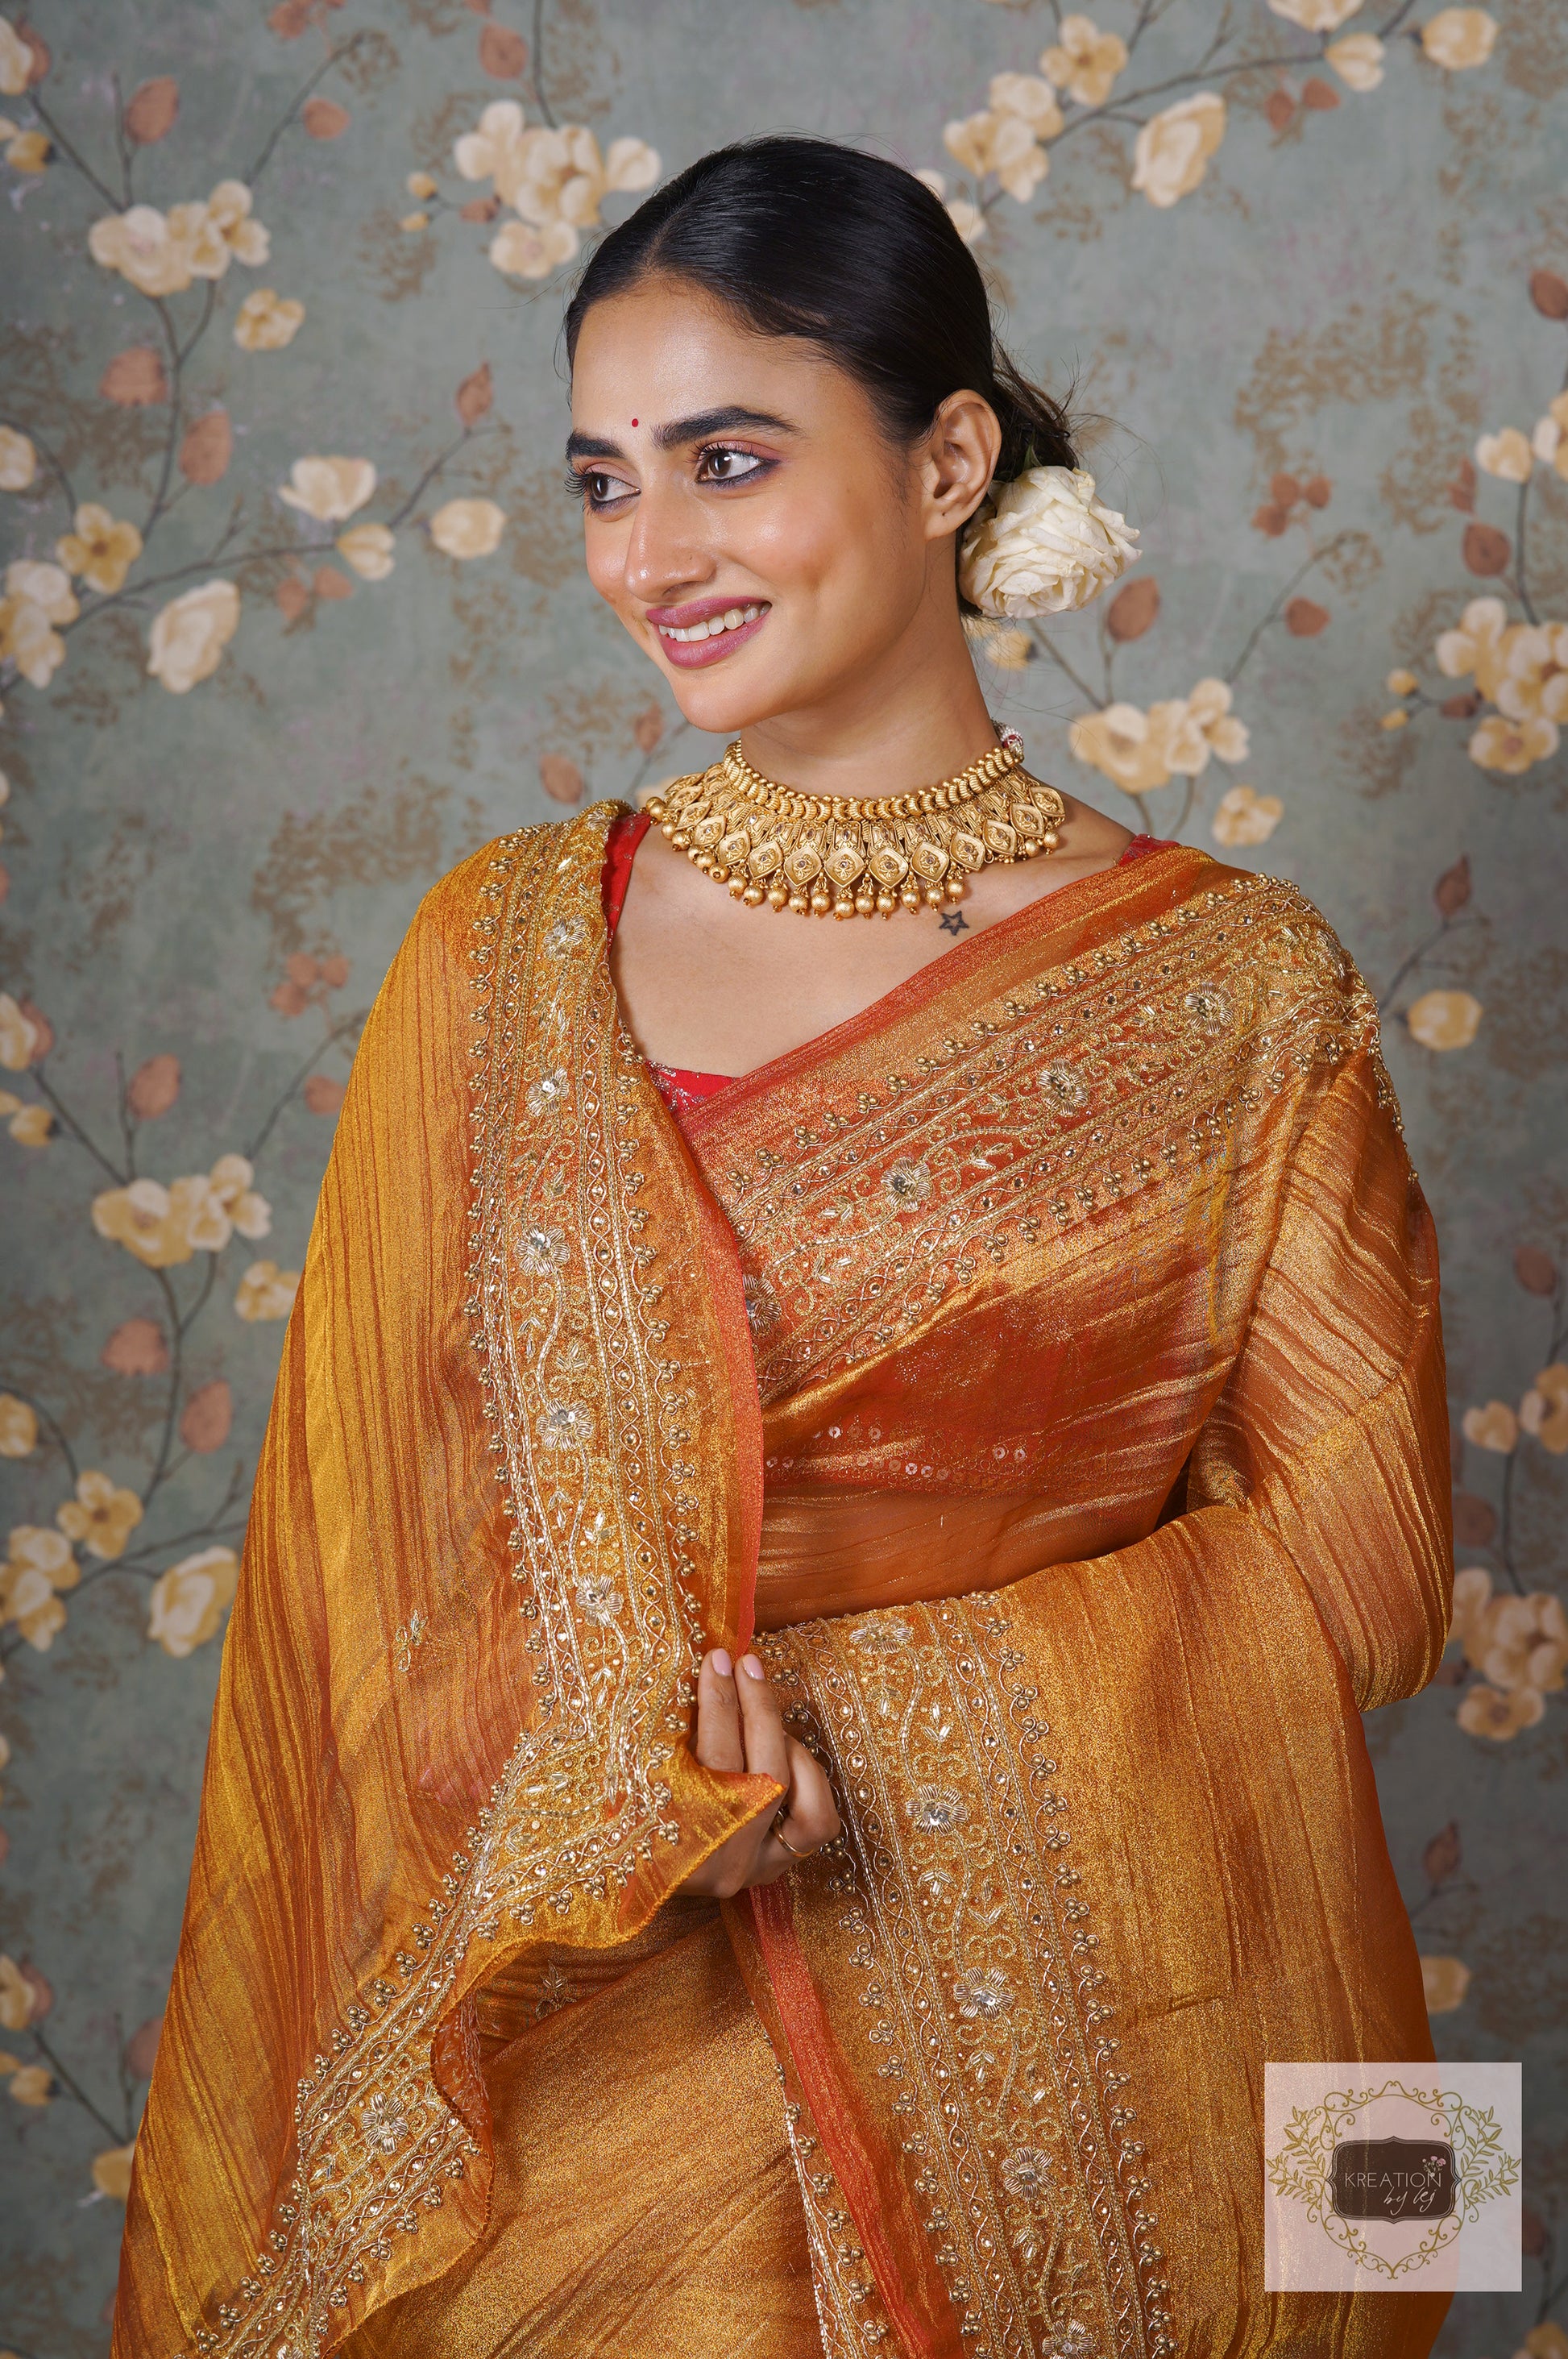 Buy Saree Mall Orange Embellished Saree With Blouse for Women's Online @  Tata CLiQ